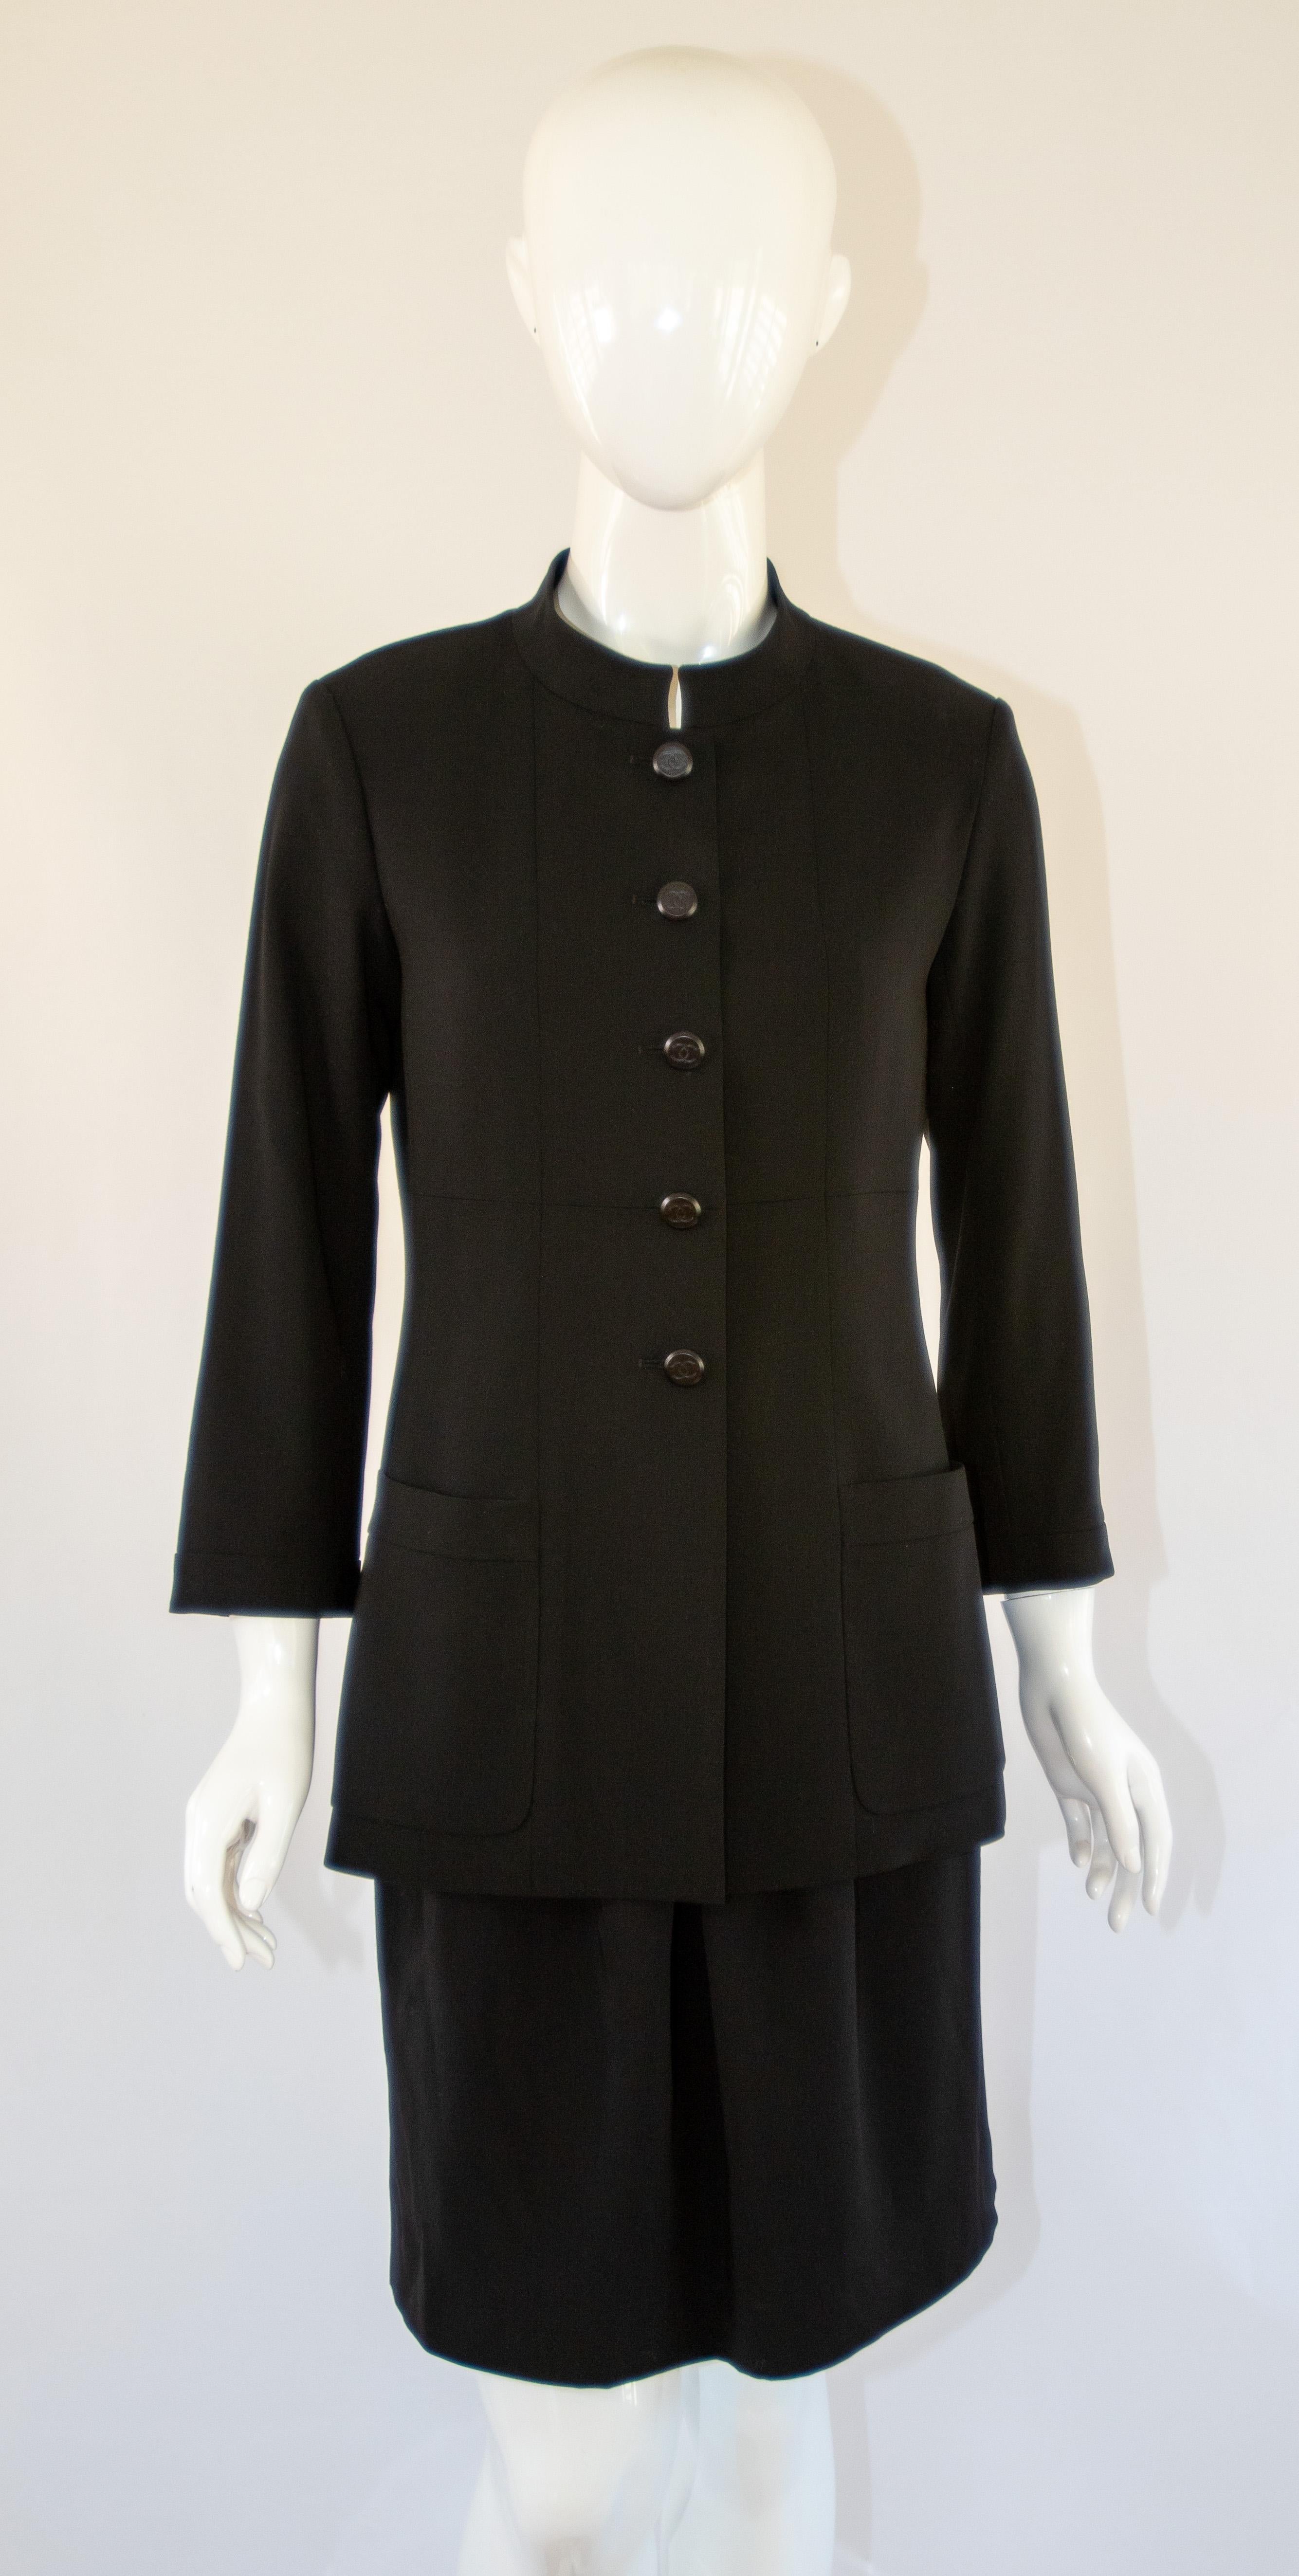 Vintage Chanel classic black blazer jacket 98A  from 1998 Fall Collection.
There are five front buttons and the 2 patch pockets on the front. 
Featuring a small unstructured collar and 3/4 length sleeves.
Buttons are shiny black plastic with the CC